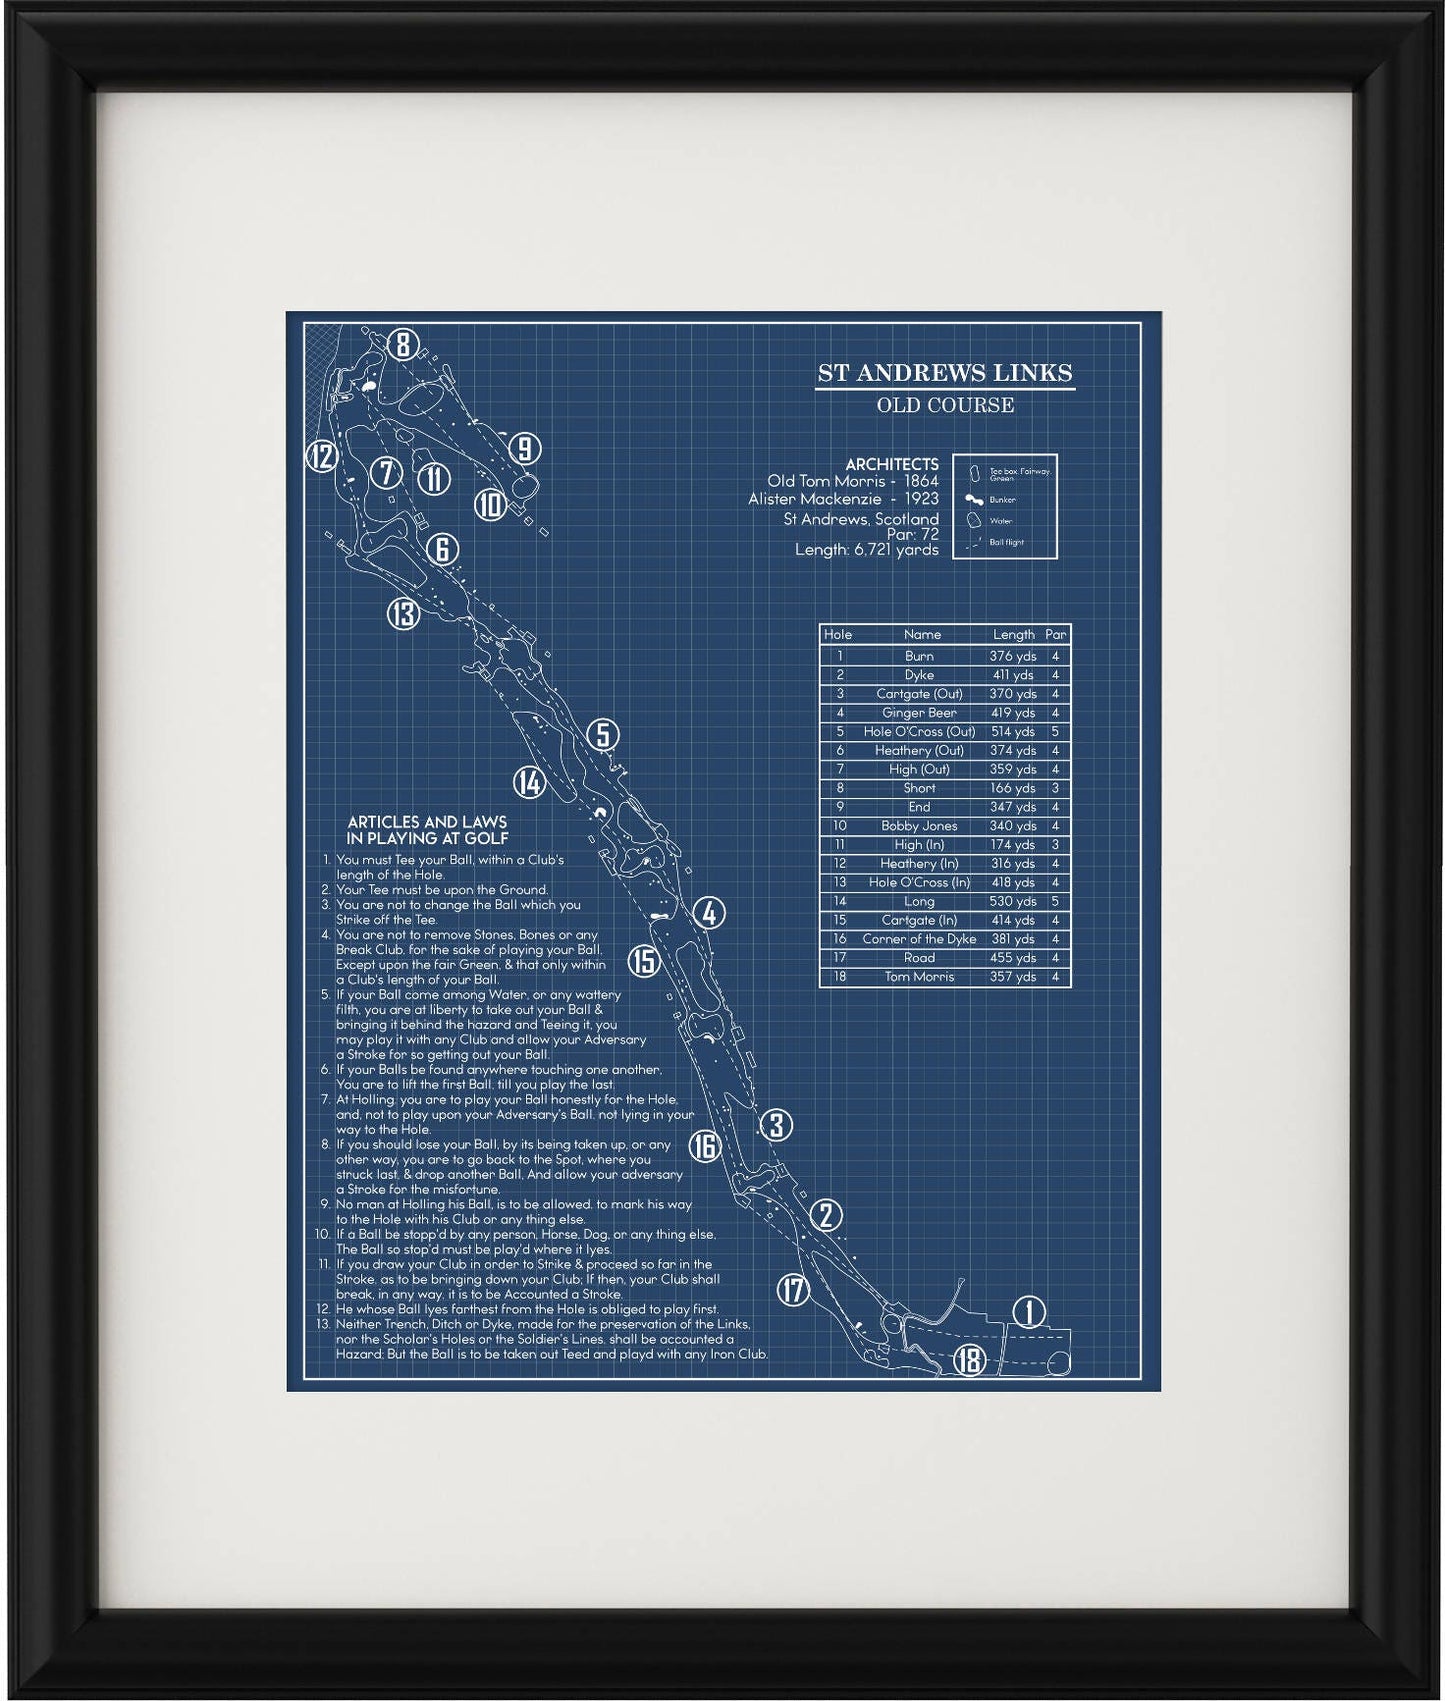 The Old Course with the Original 13 Rules of Golf Blueprint (Print)